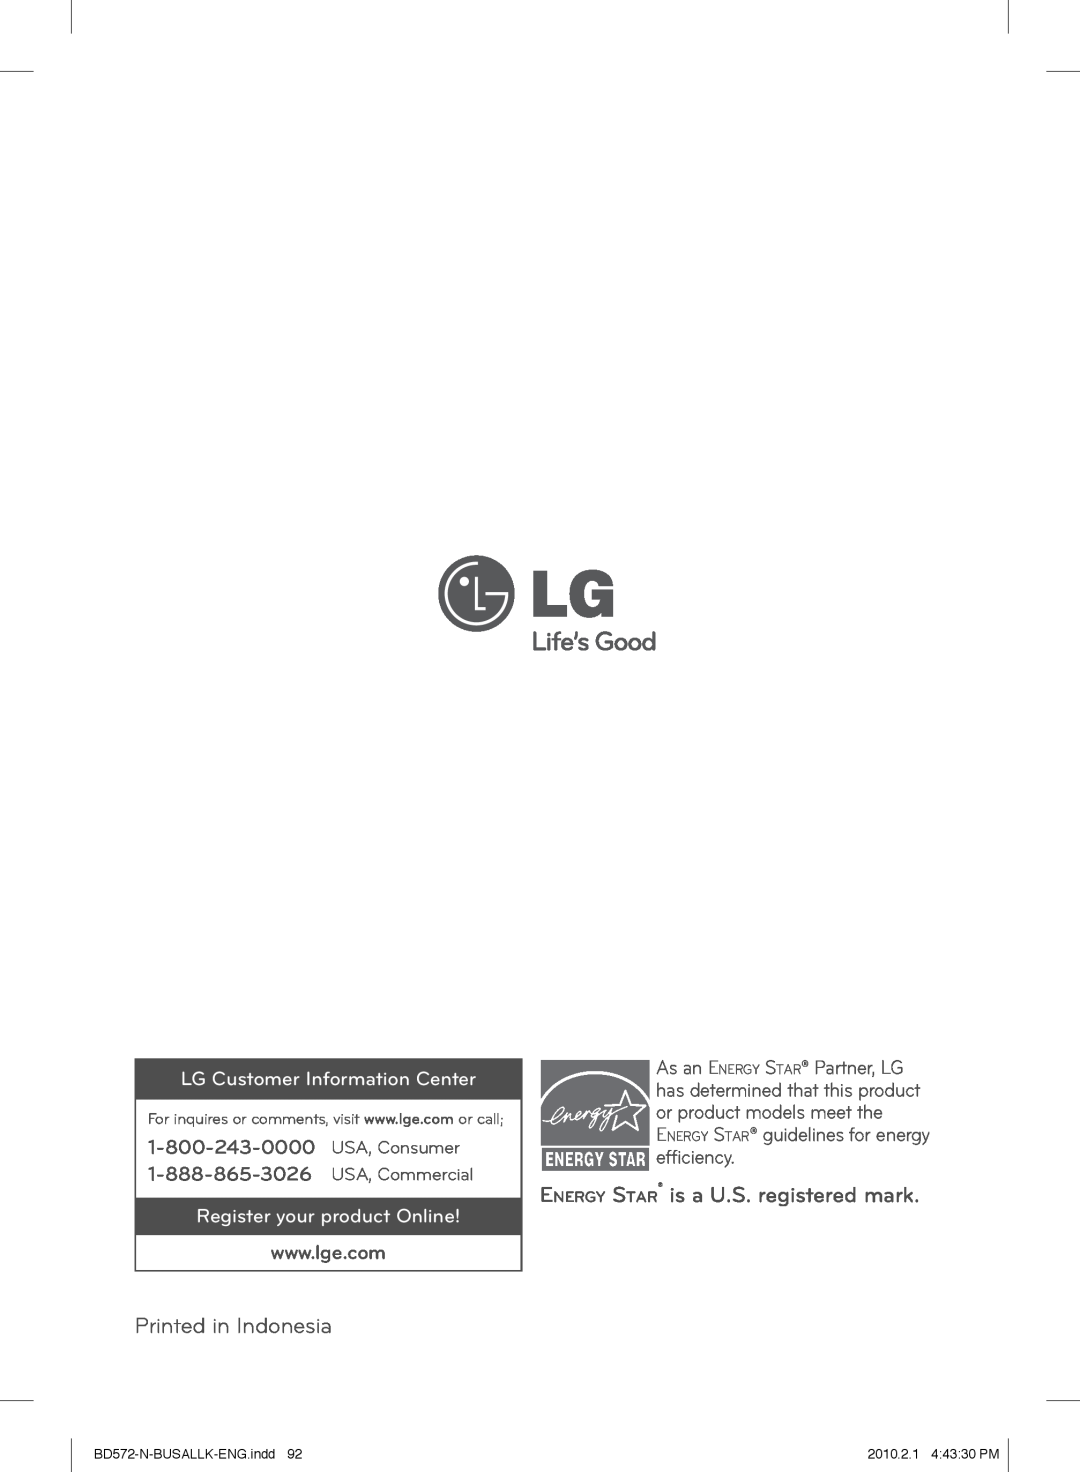 LG Electronics BD570 Printed in Indonesia, ENERGY STAR is a U.S. registered mark, LG Customer Information Center 